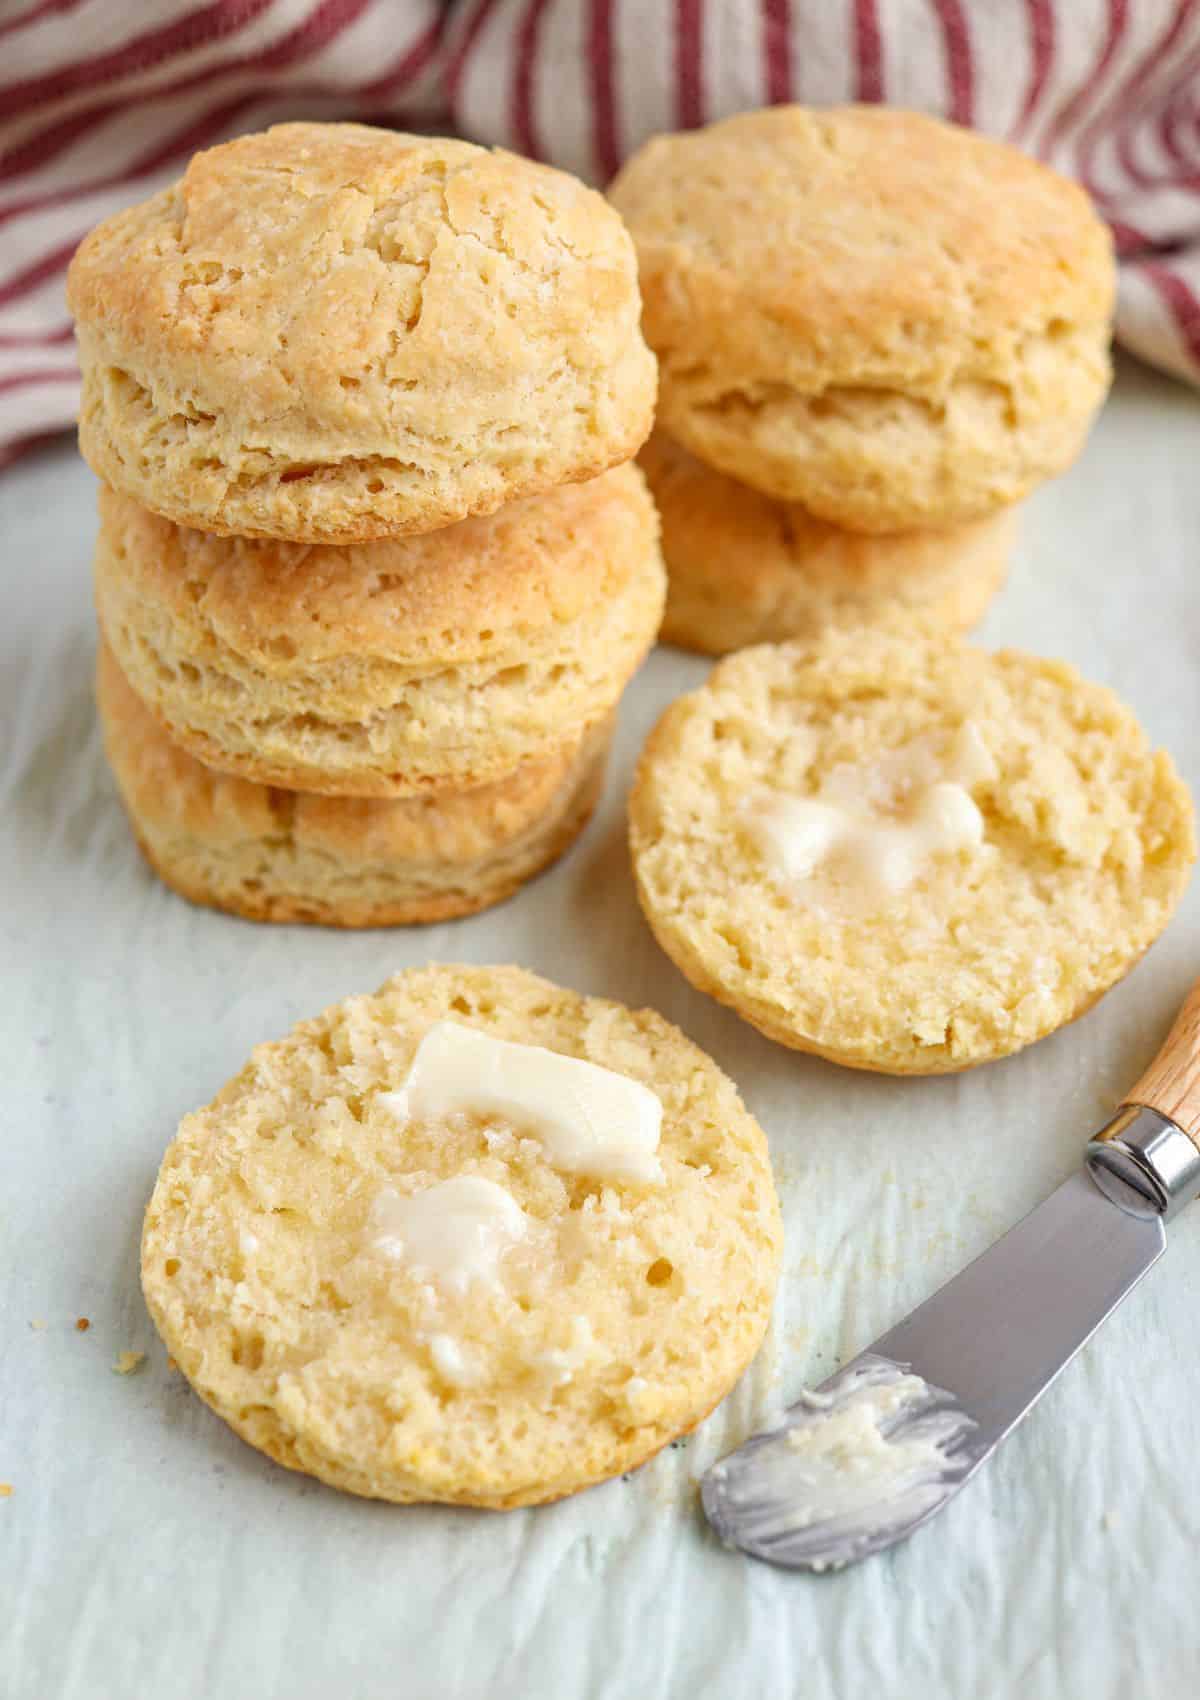 freshly baked round biscuits, stacked on parchment paper, one biscuit split and smeared with butter.